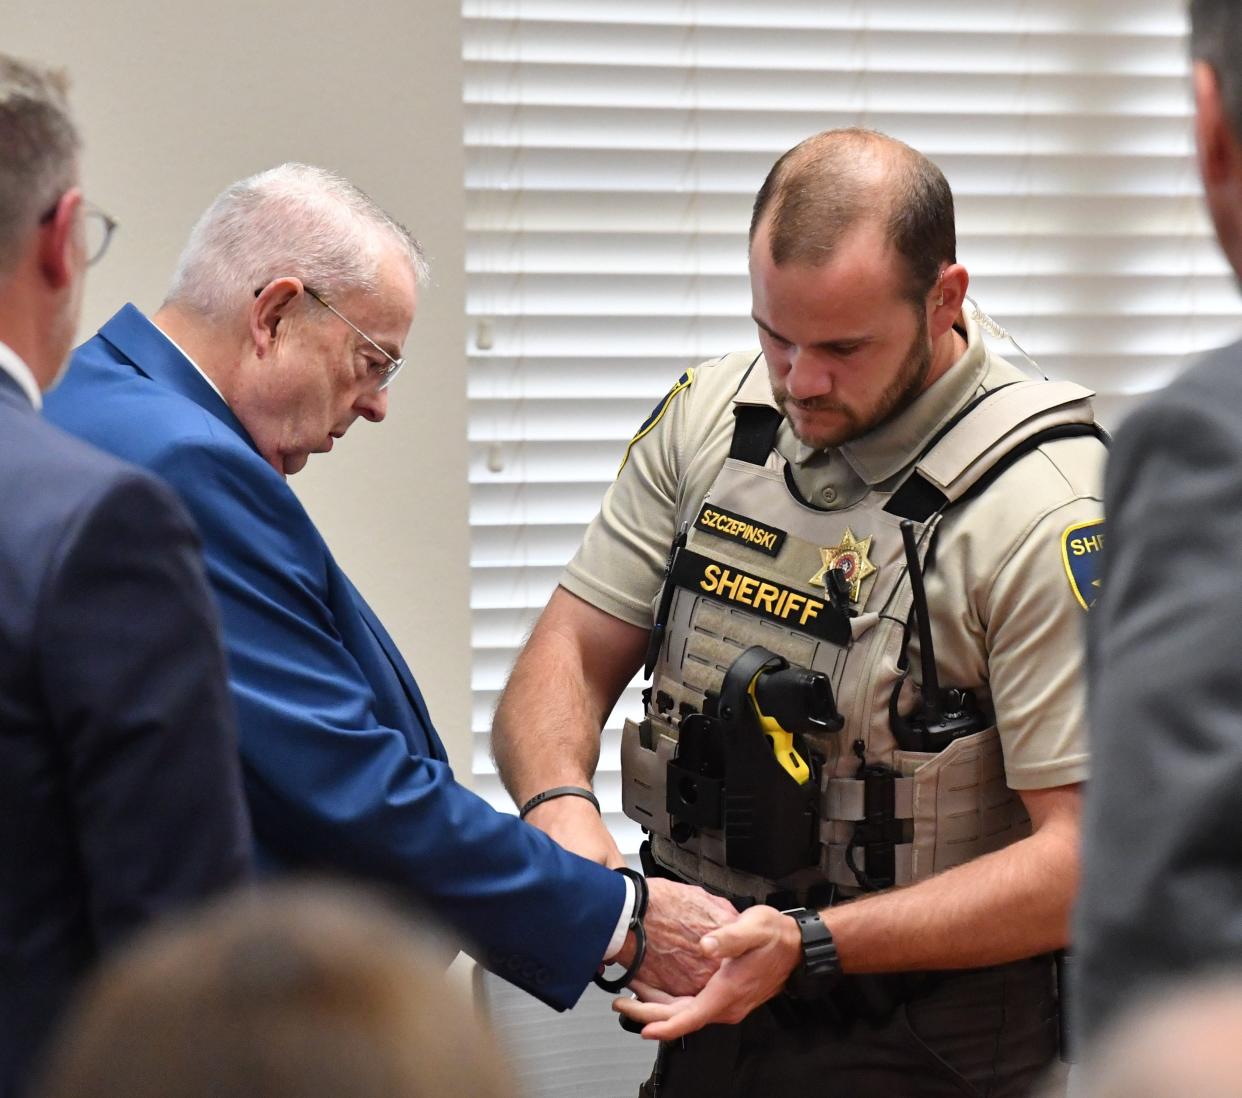 A Wichita County deputy handcuffs Ronnie Allen Killingsworth, pastor of Rephidim Church in Wichita Falls. A jury convicted Killingsworth, 79, on six counts of Indecency with a Child on three girls in his church. A jury will determine Killingsworth's punishment Wednesday.